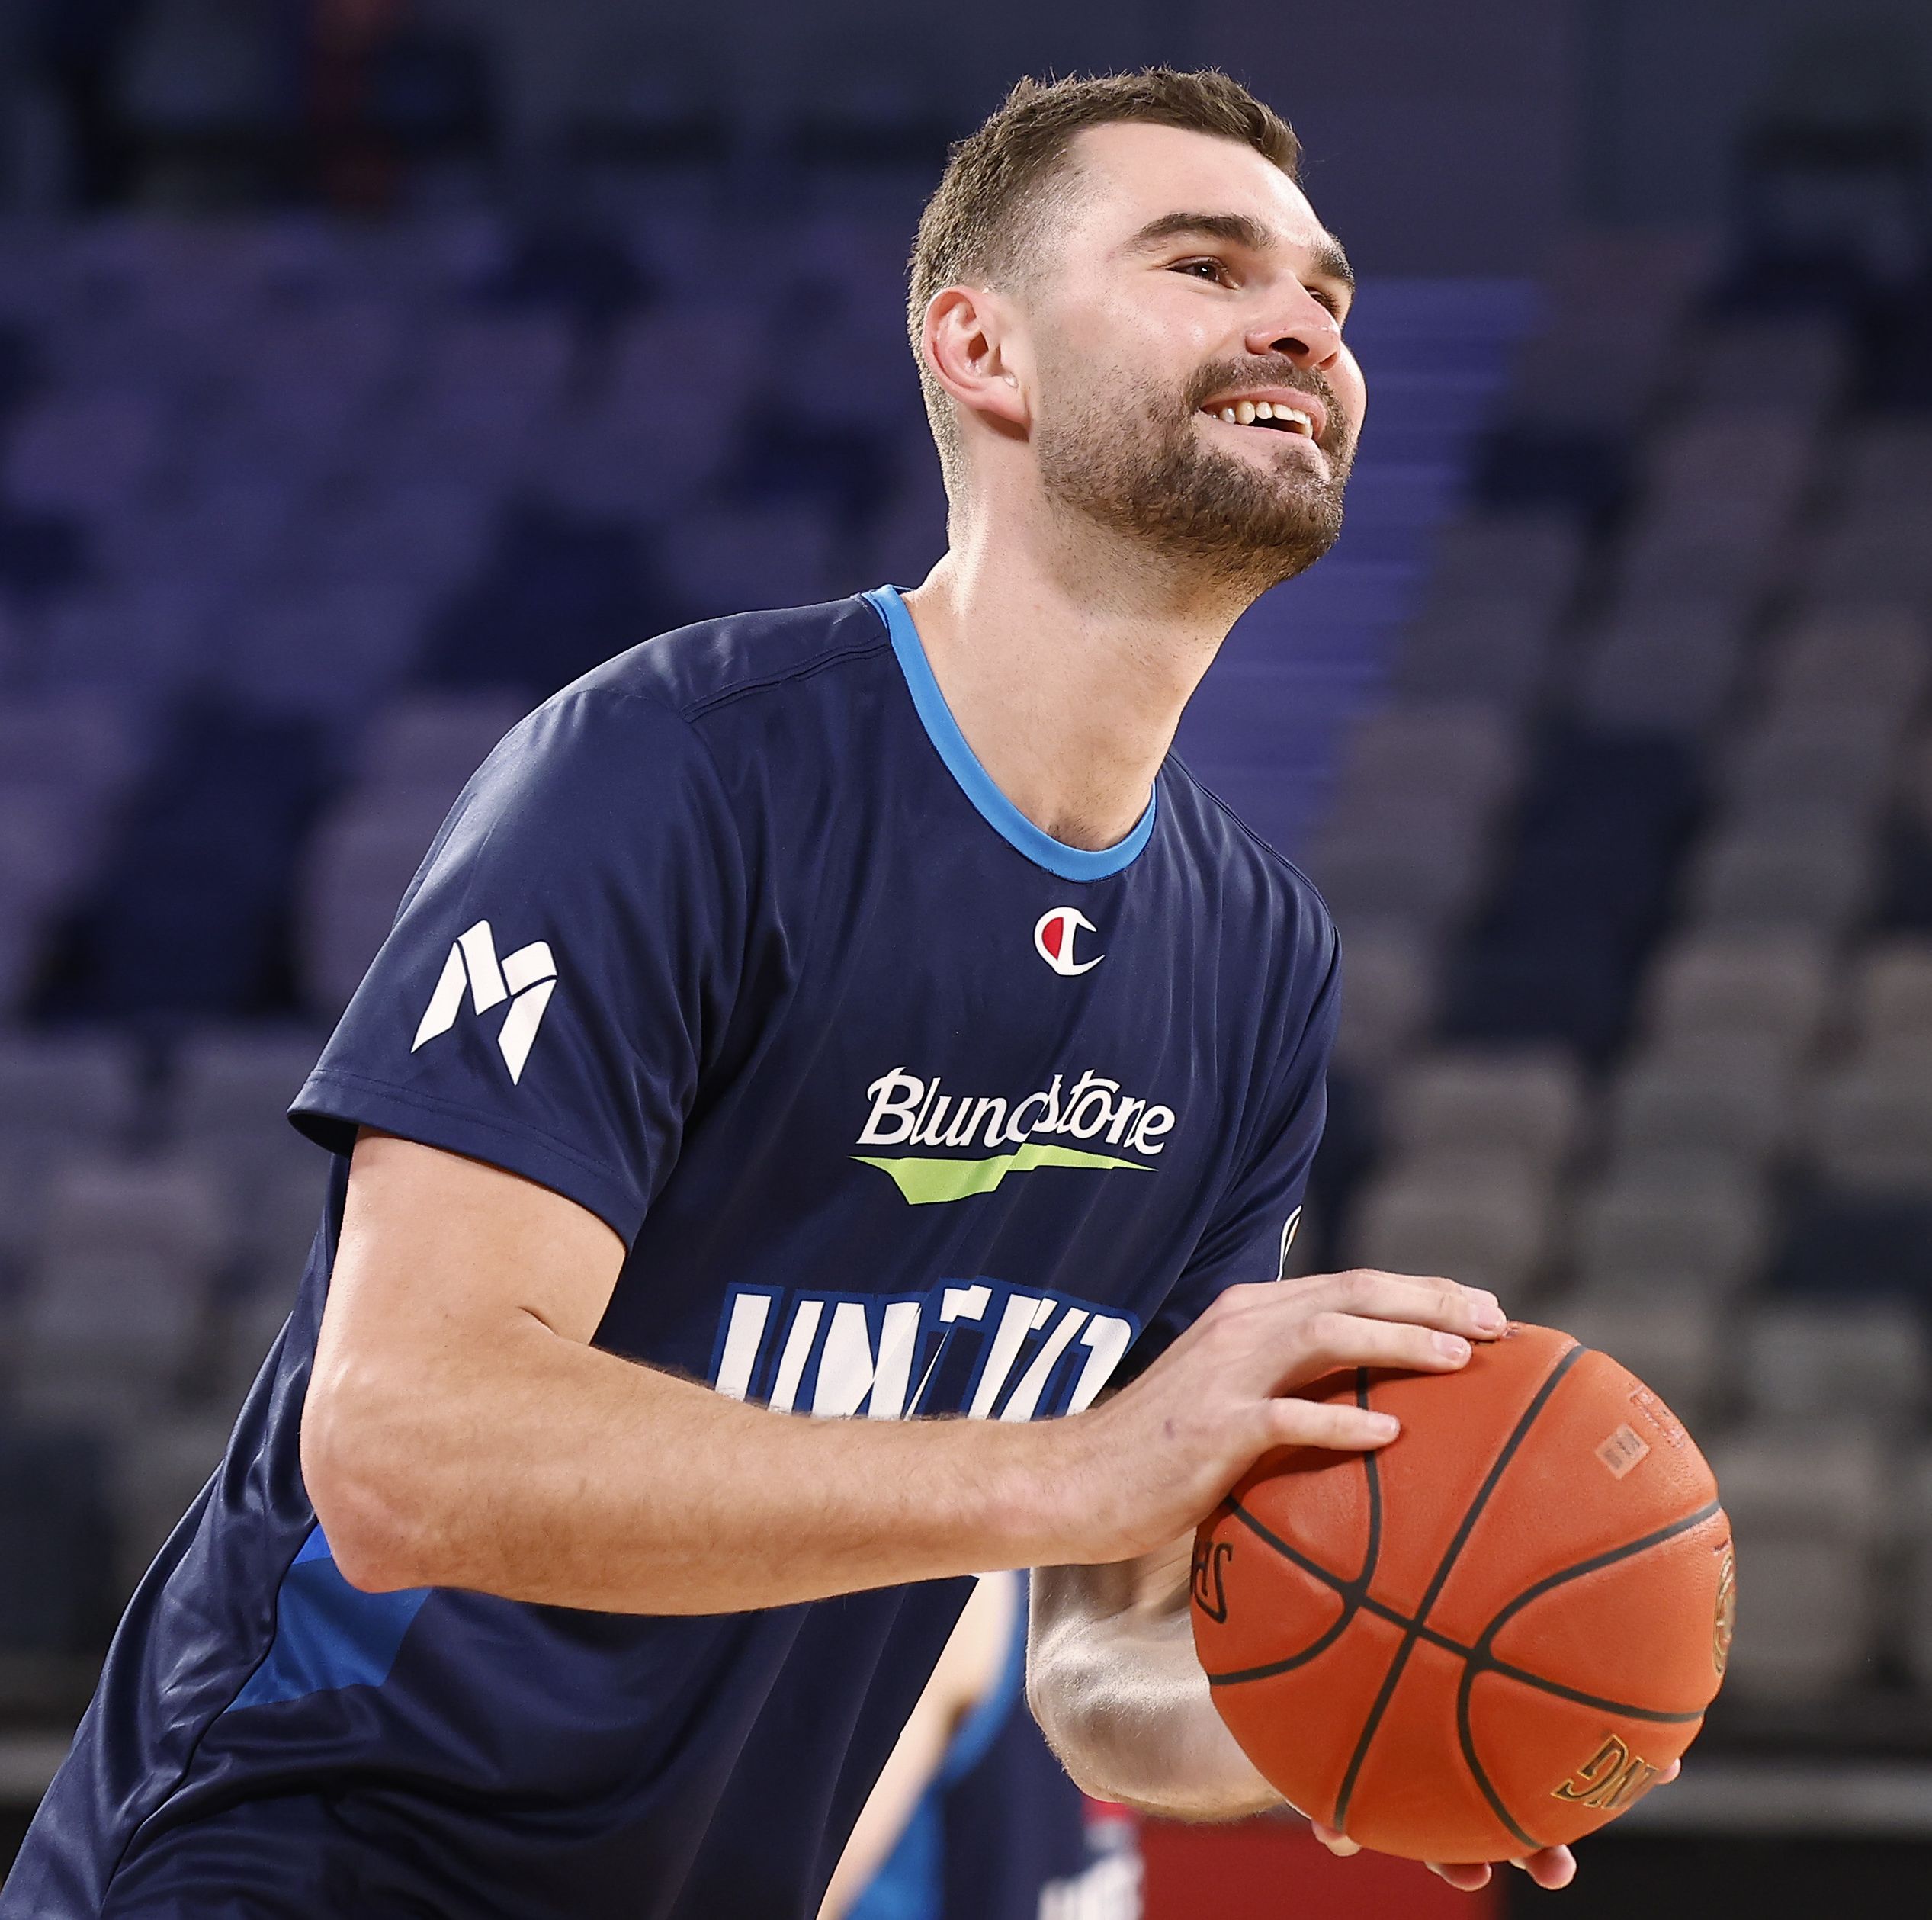 Pro Basketball Player Isaac Humphries Comes Out to His Teammates in Emotional Video